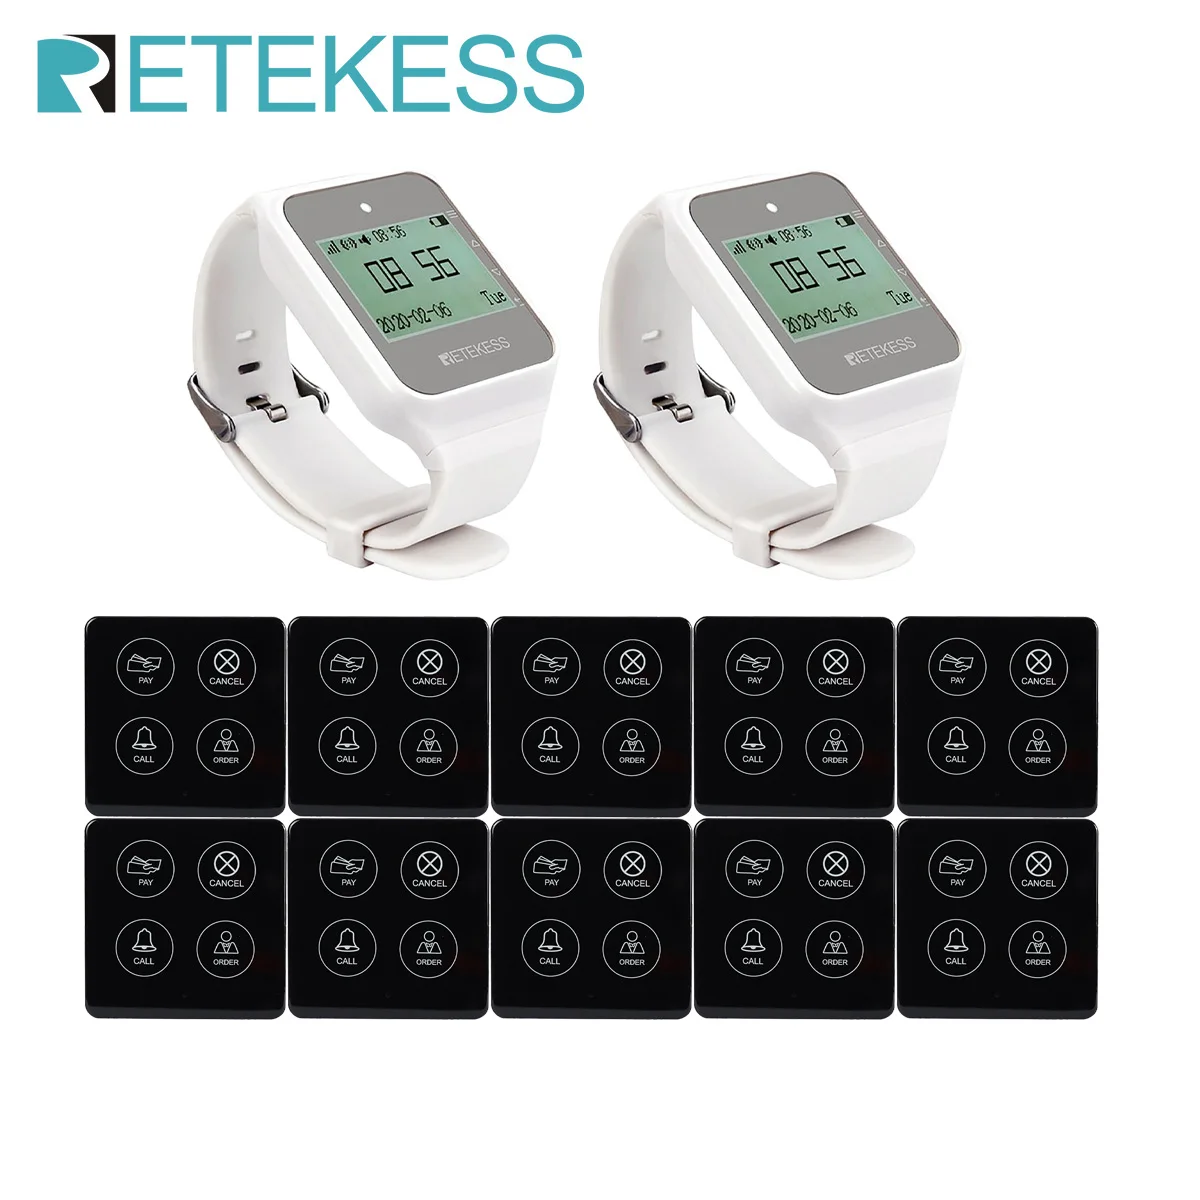 Retekess Restaurant Waiter Calling System 2 Td108 Watch Receiver 10 Td033 Wireless Call Buttons Pager For Hookah Cafe Bar Club